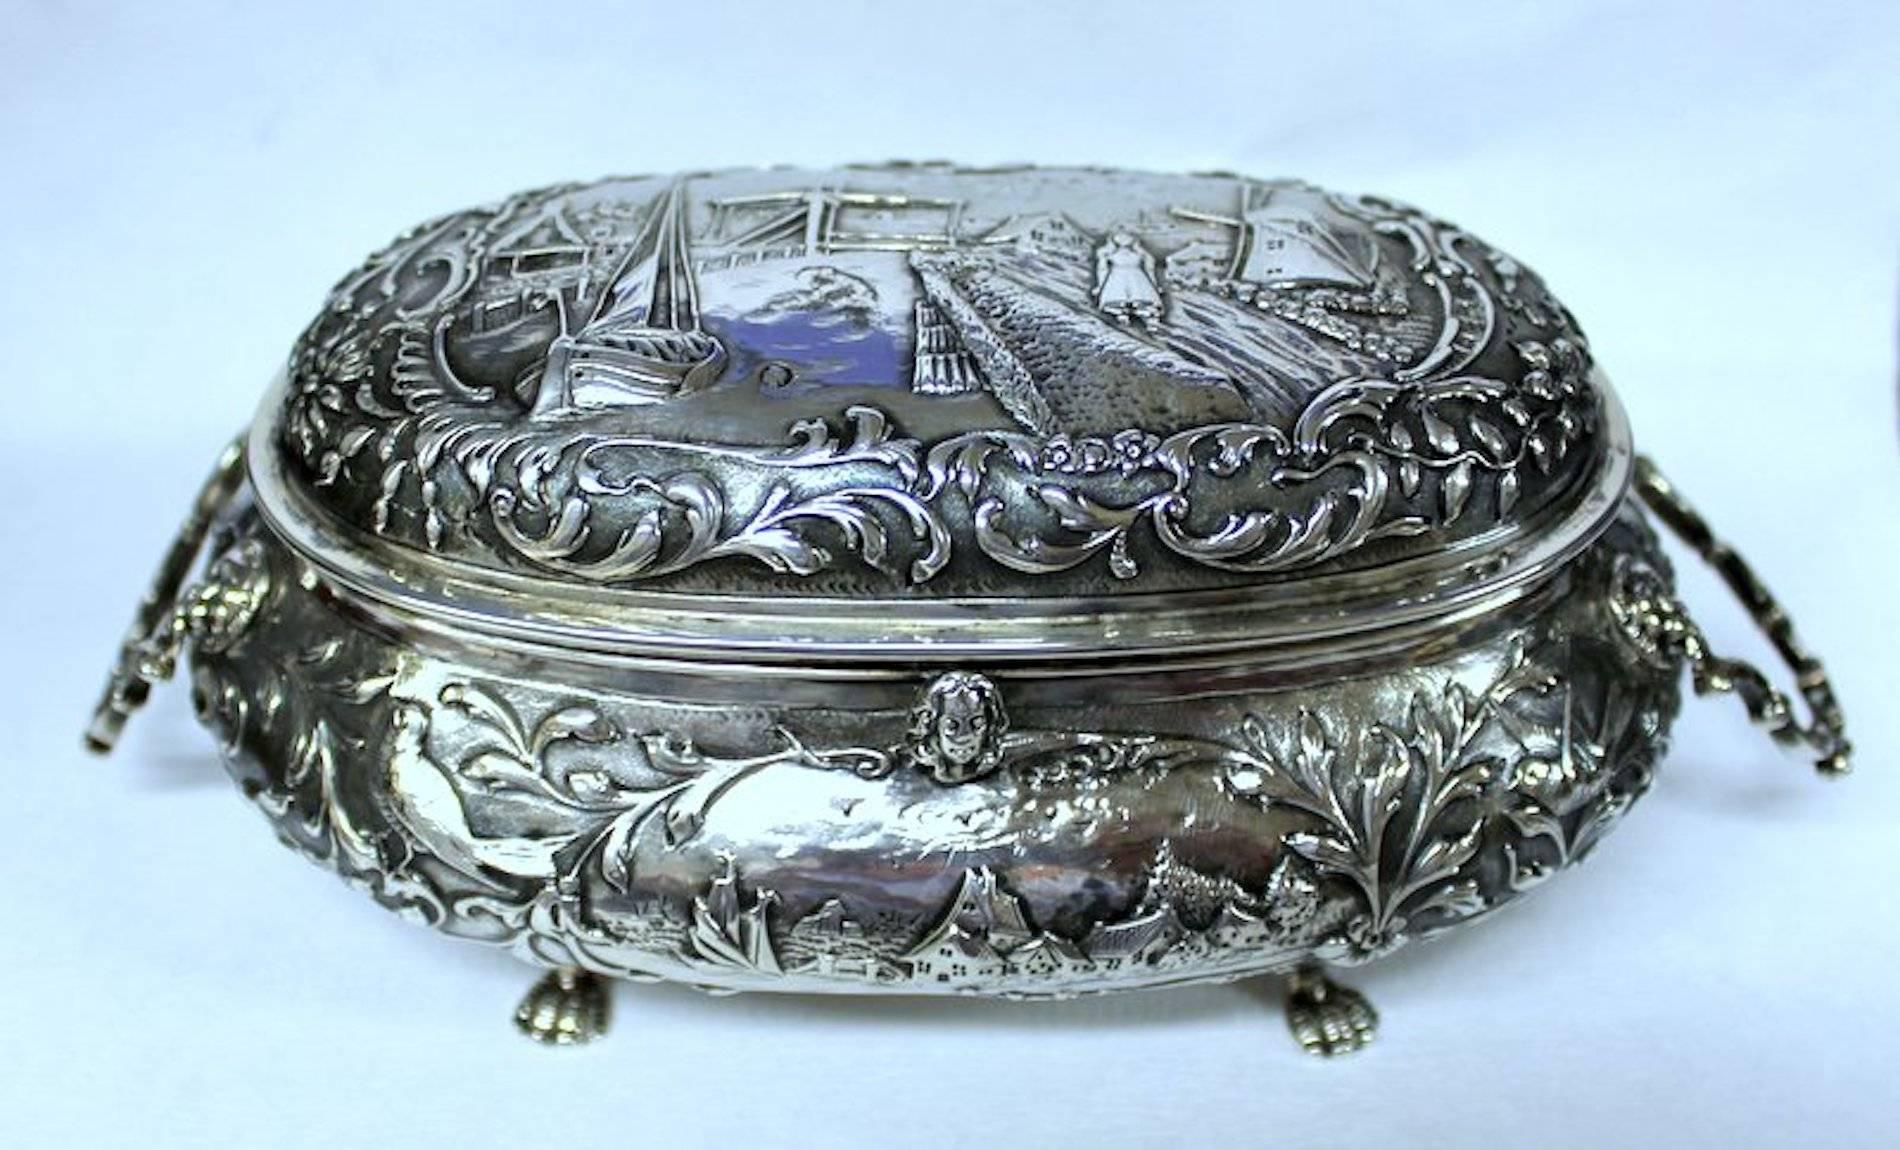 Exceptional large antique Dutch .833 fine silver hand chased casket or hinged box.
Please note exceptional hand chased detail overall, 